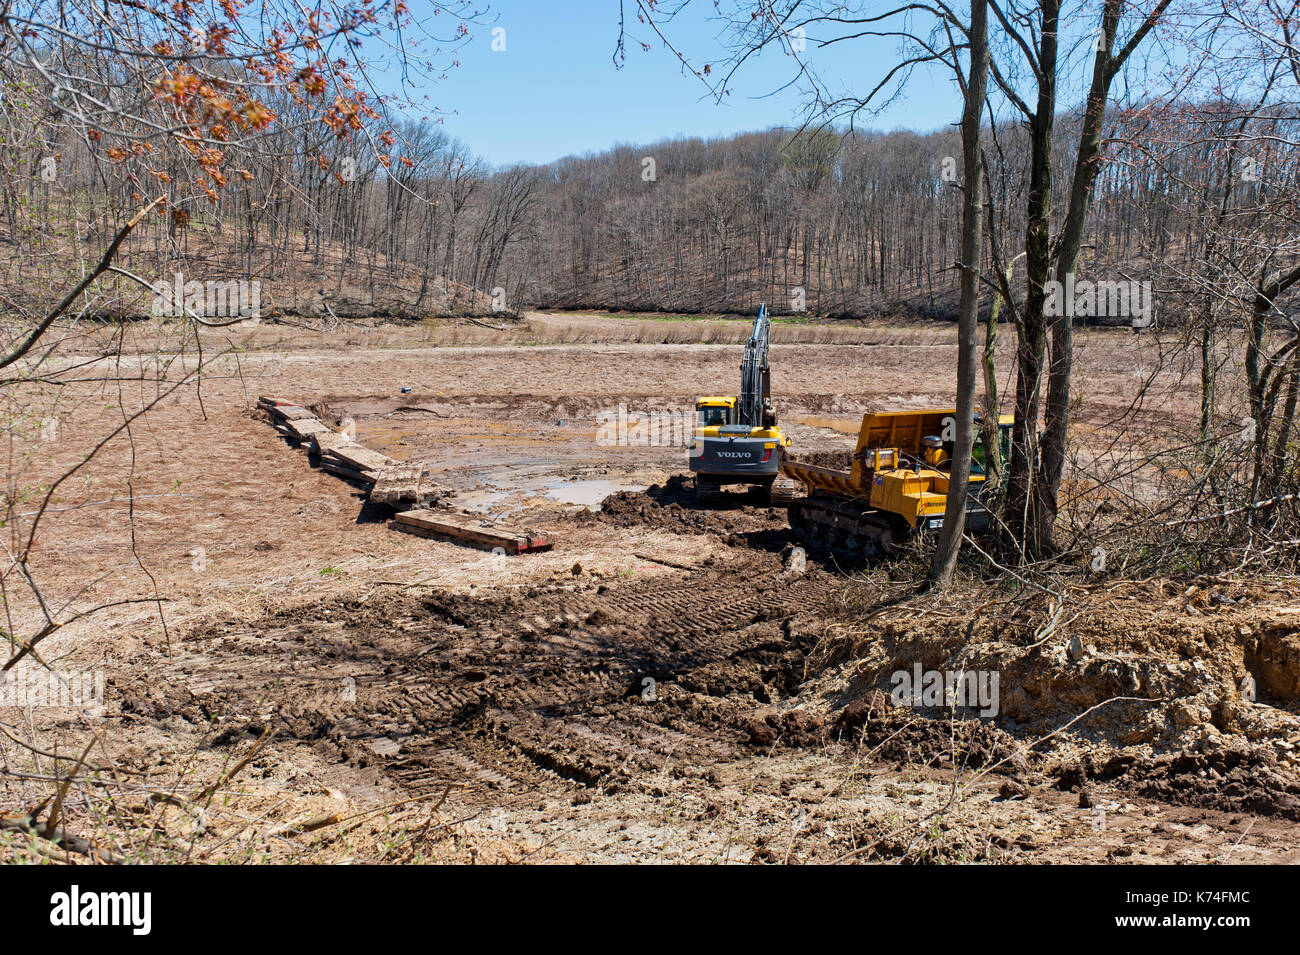 CONSTRUCTION EQUIPMENT REMOVING SEDIMENT FROM DRY LAKE BED OF SPEEDWELL FORGE LAKE, LITITZ PENNSYLVANIA Stock Photo